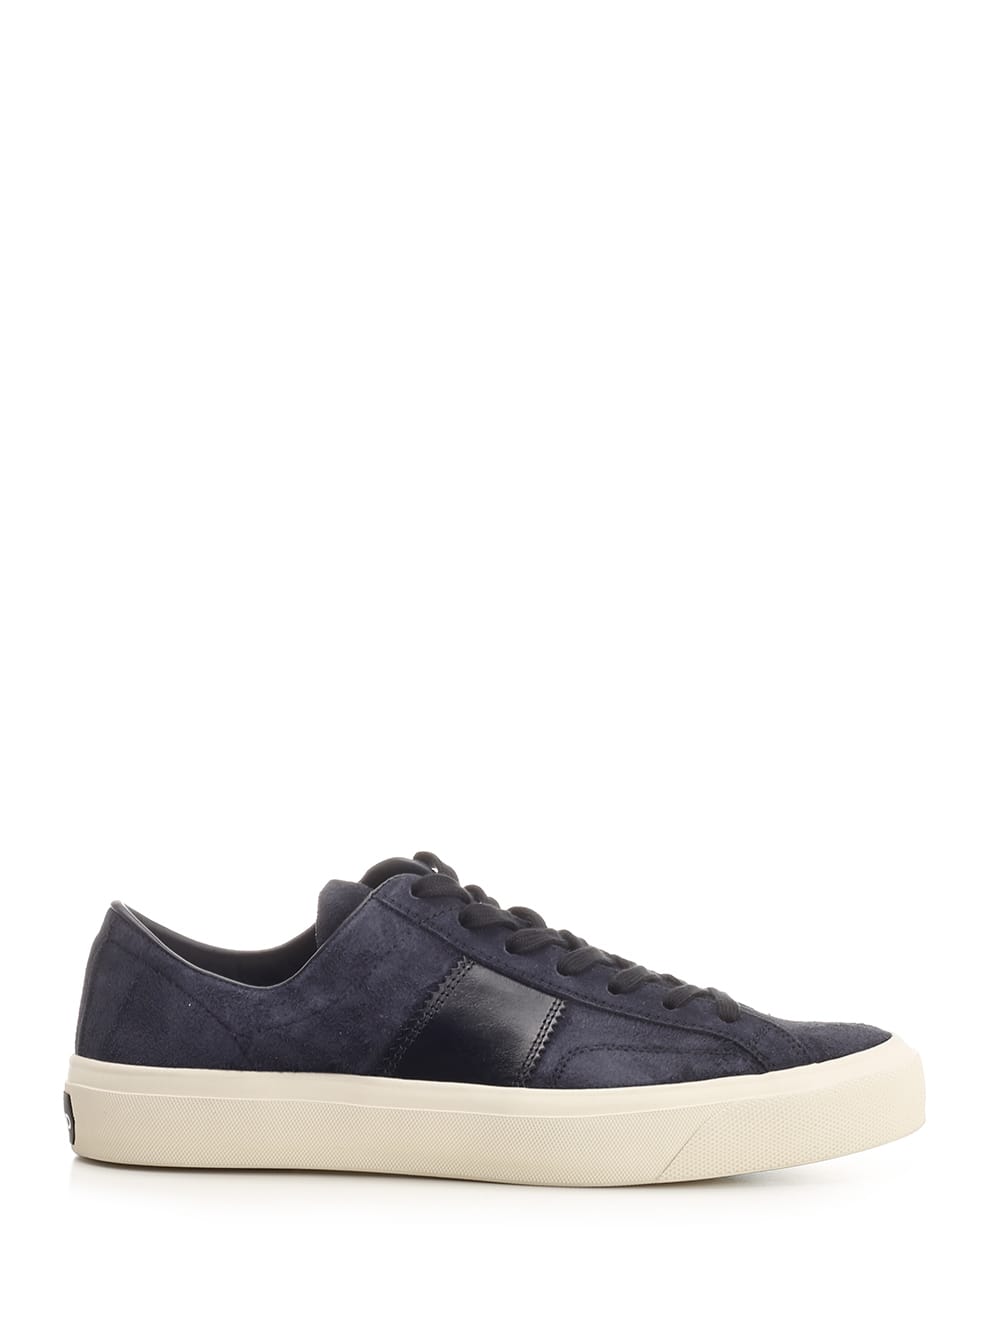 TOM FORD CAMBRIDGE LACE-UP SNEAKERS